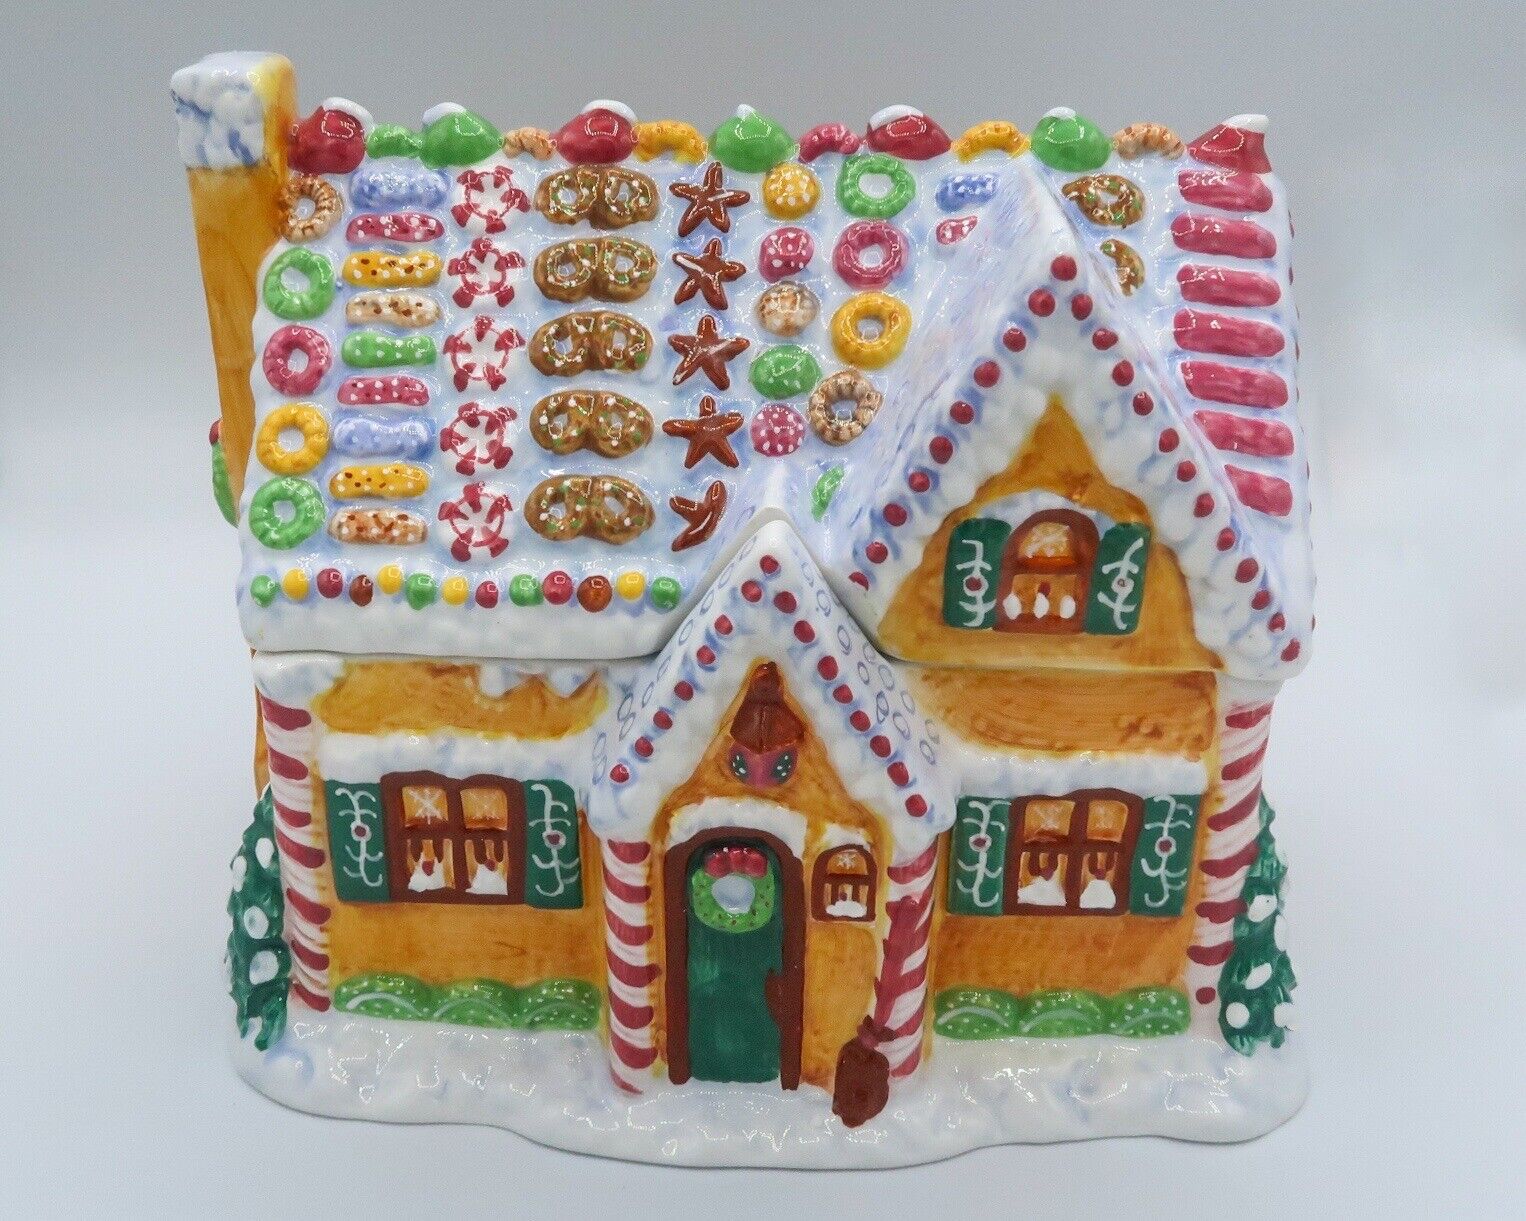 VTG Pipka Chef Claus Gingerbread House Christmas Cookie Jar HTF 2000